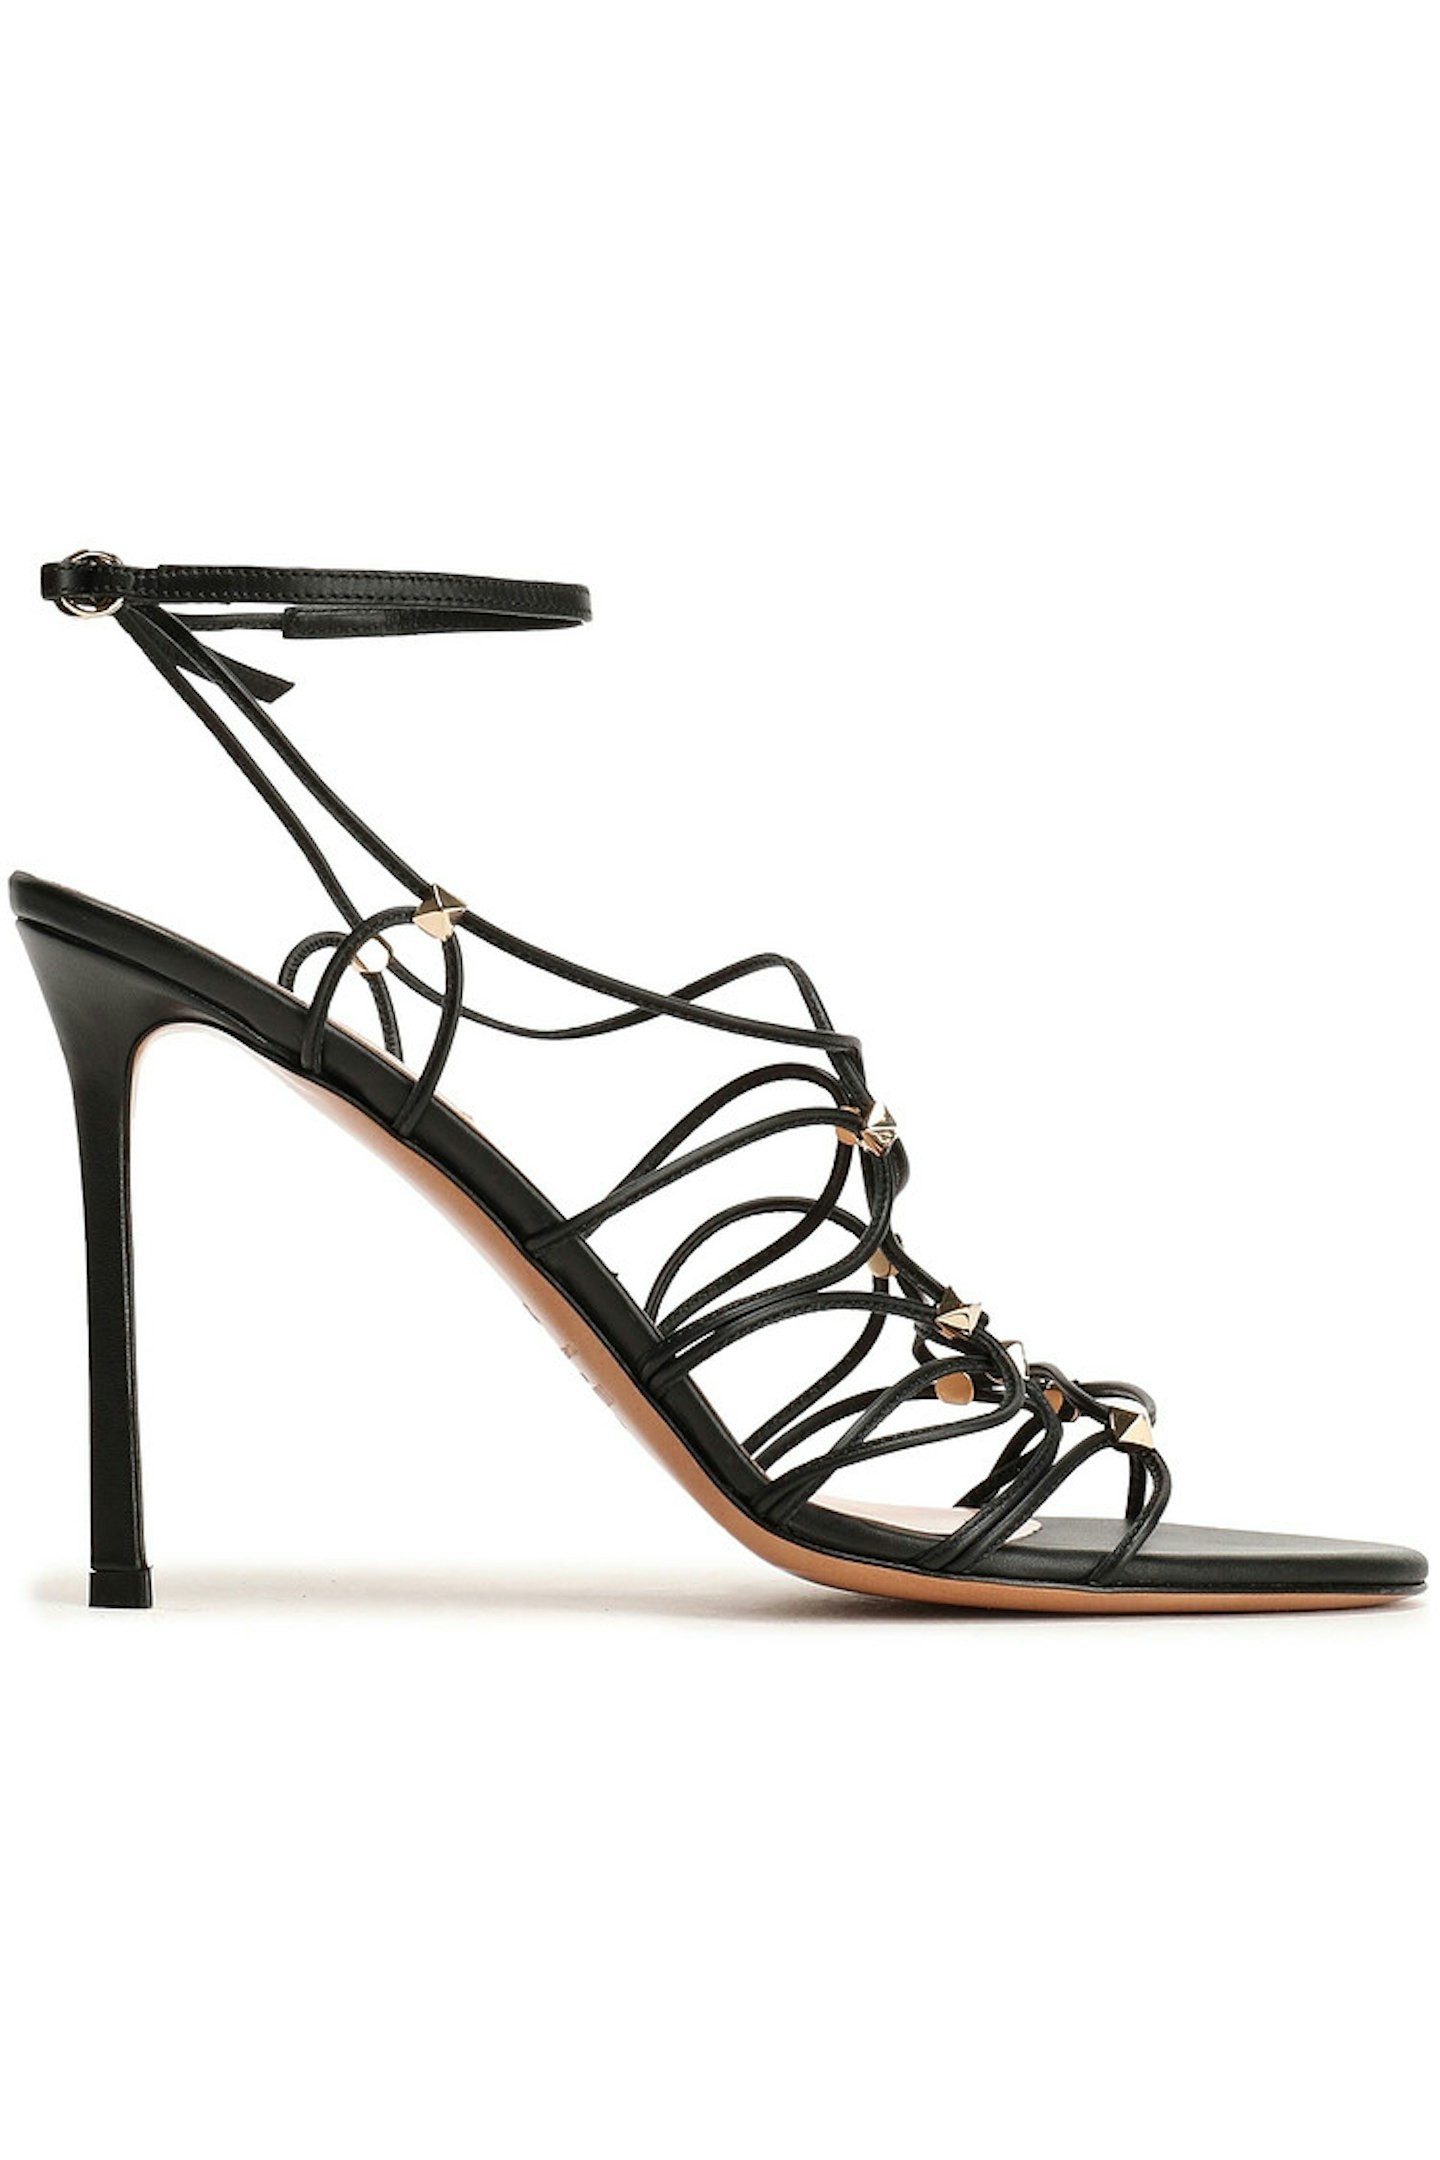 Valentino, Rockstud lace-up leather sandals, WAS £448, NOW £285